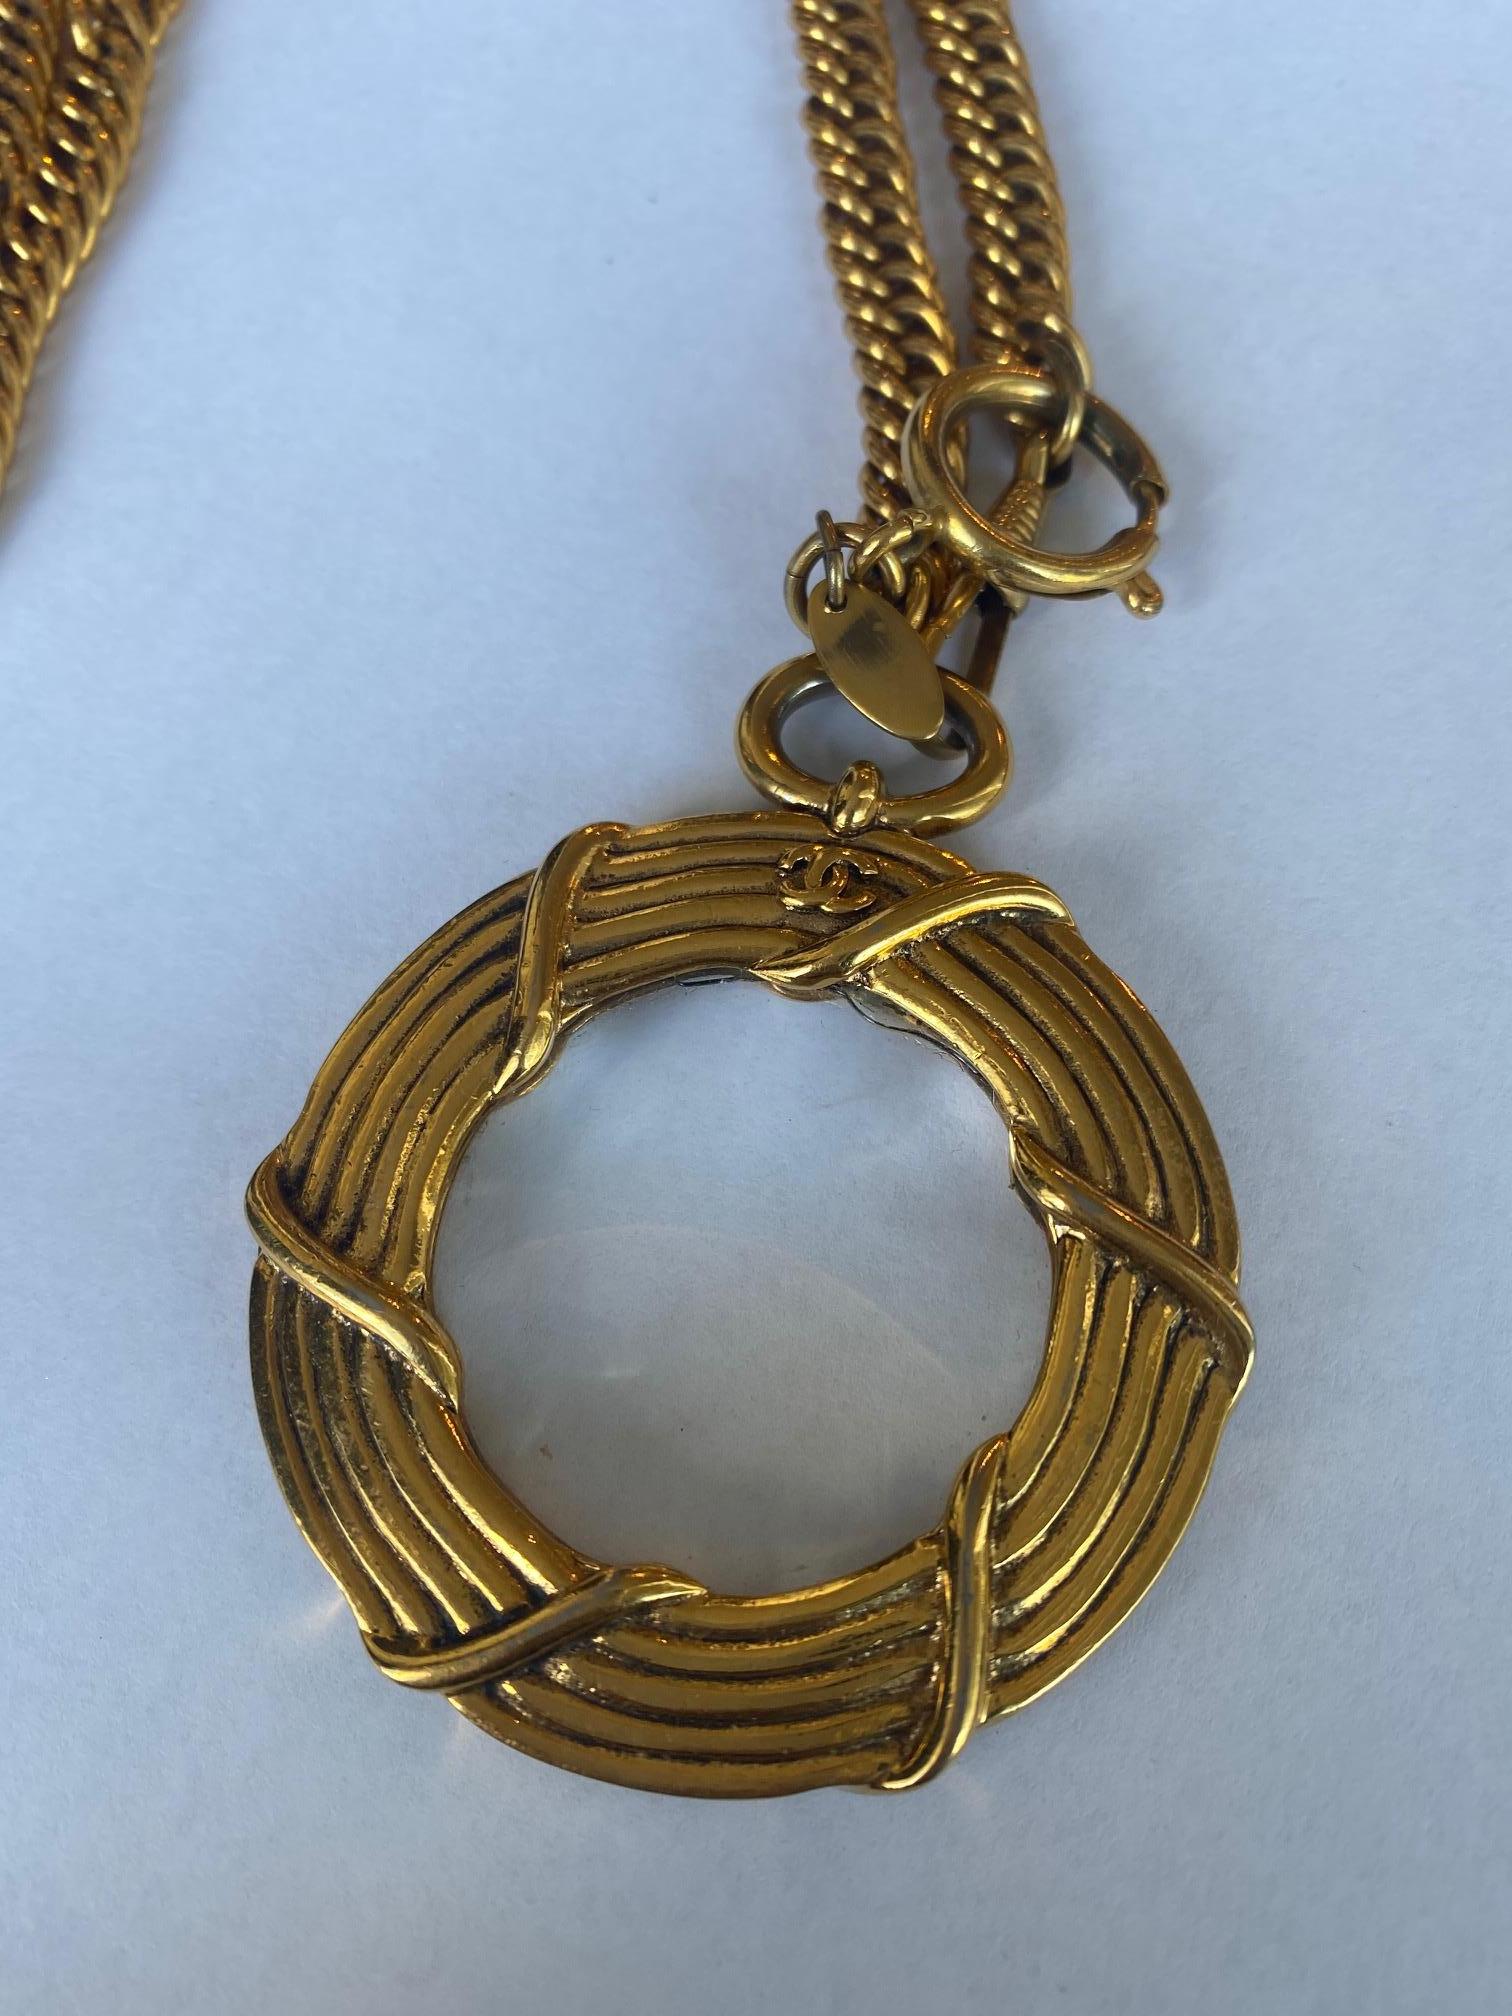 Rare vintage Chanel piece. Double chain necklace. Magnifying glass pendant. Twisted metal design around the glass features a small CC logo on top of each side.
